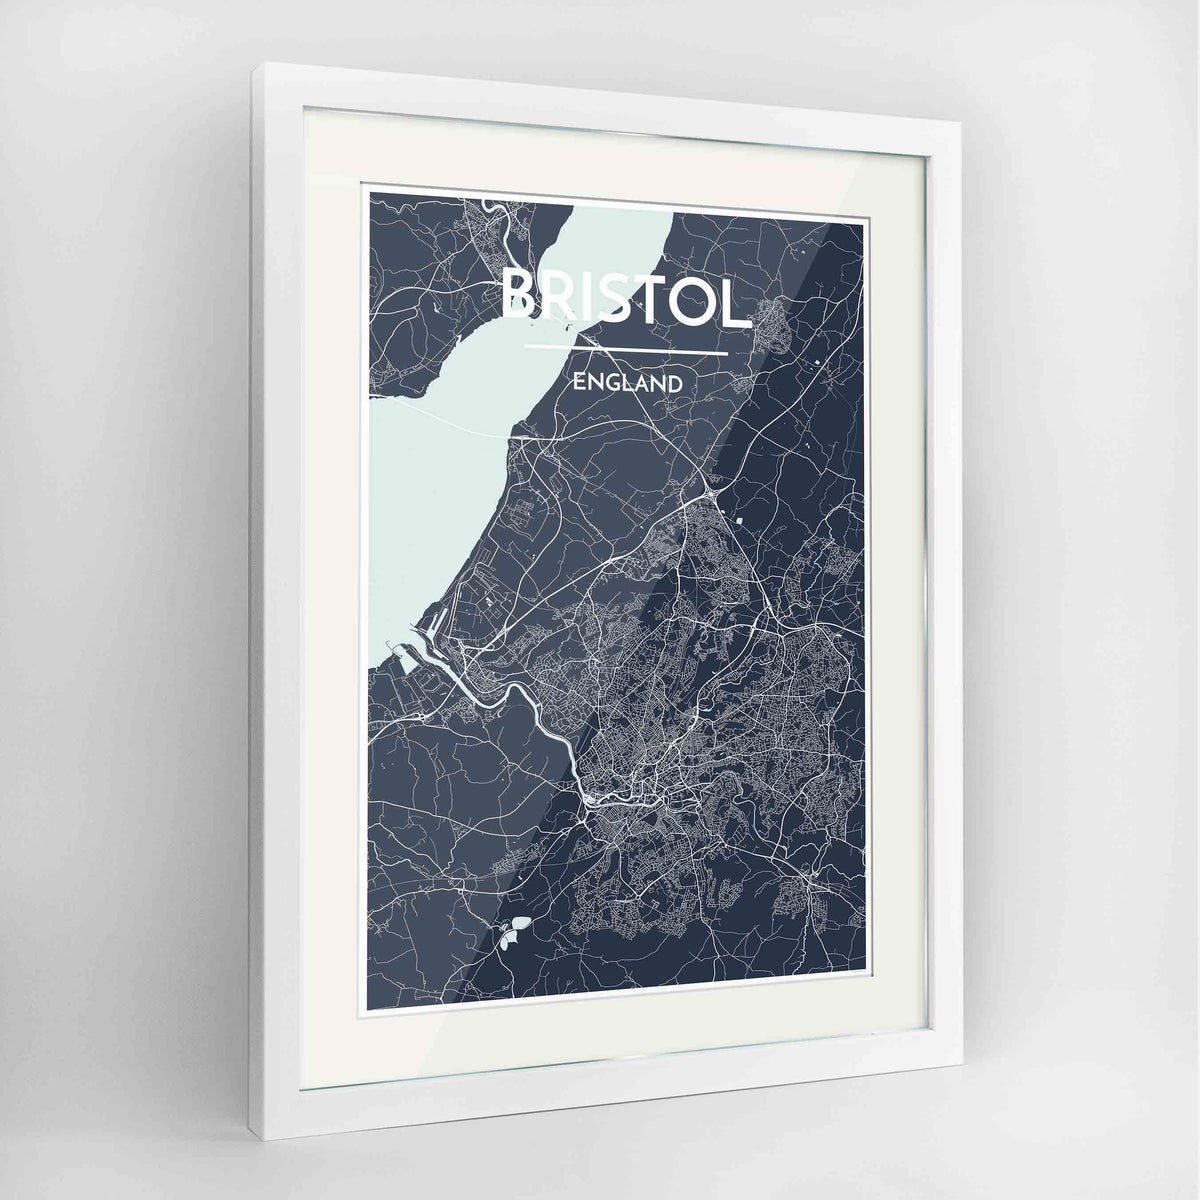 Framed Bristol Map Art Print 24x36&quot; Contemporary White frame Point Two Design Group